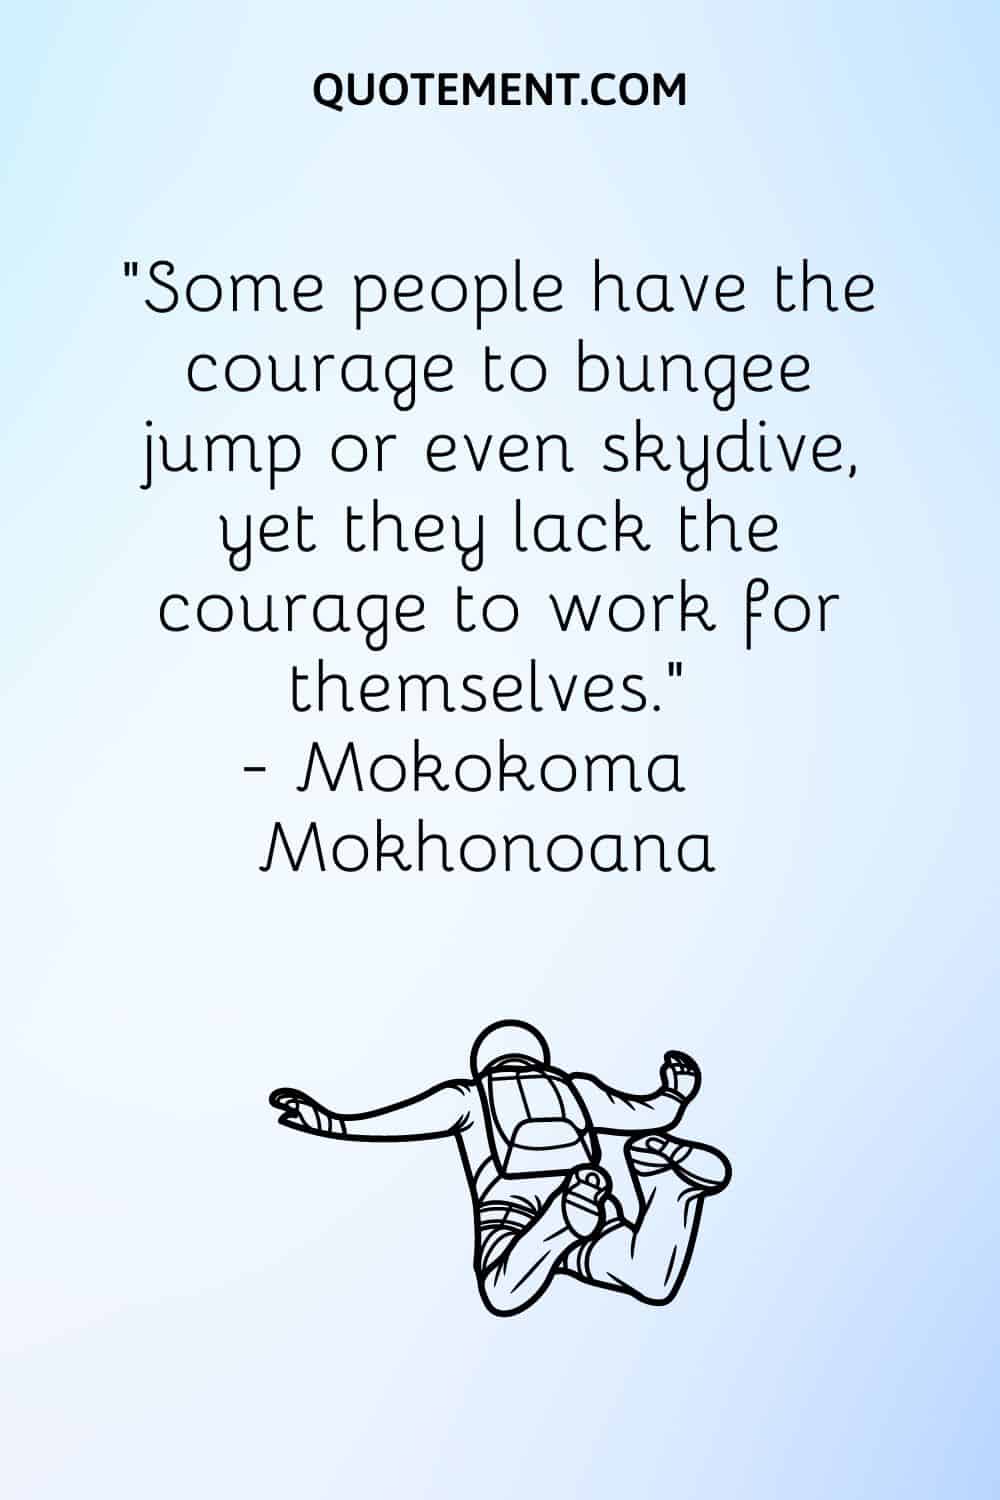 Some people have the courage to bungee jump or even skydive, yet they lack the courage to work for themselves.